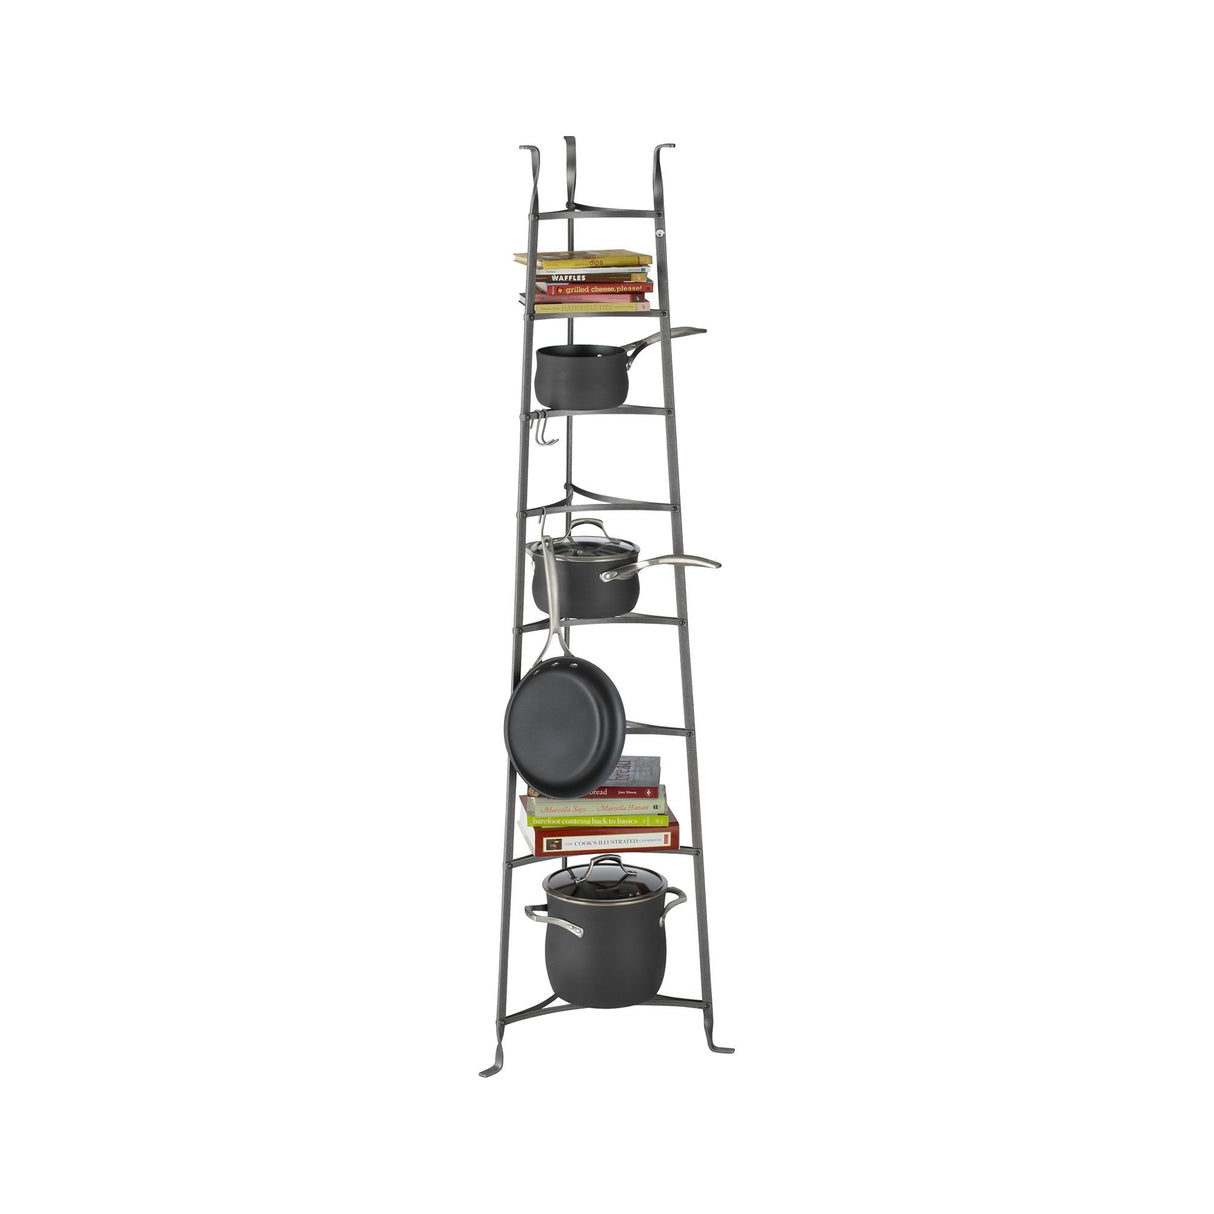 Enclume CWS8 HS 8-Tier Gourmet Stand HS